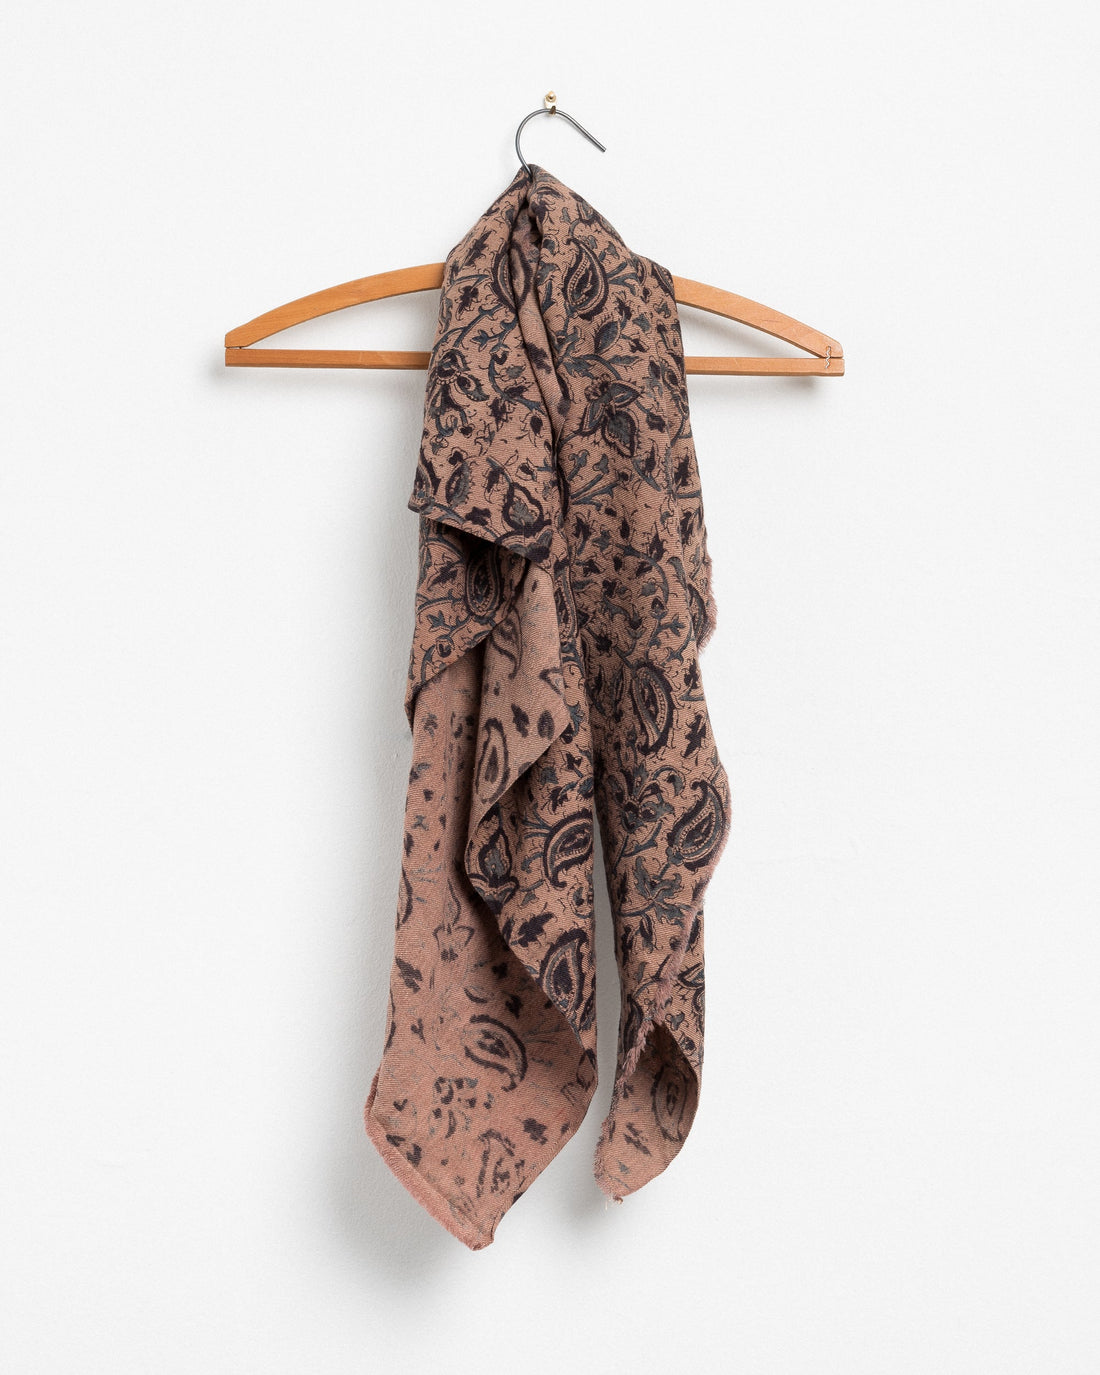 Wool Square Scarf in Indigo Paisley